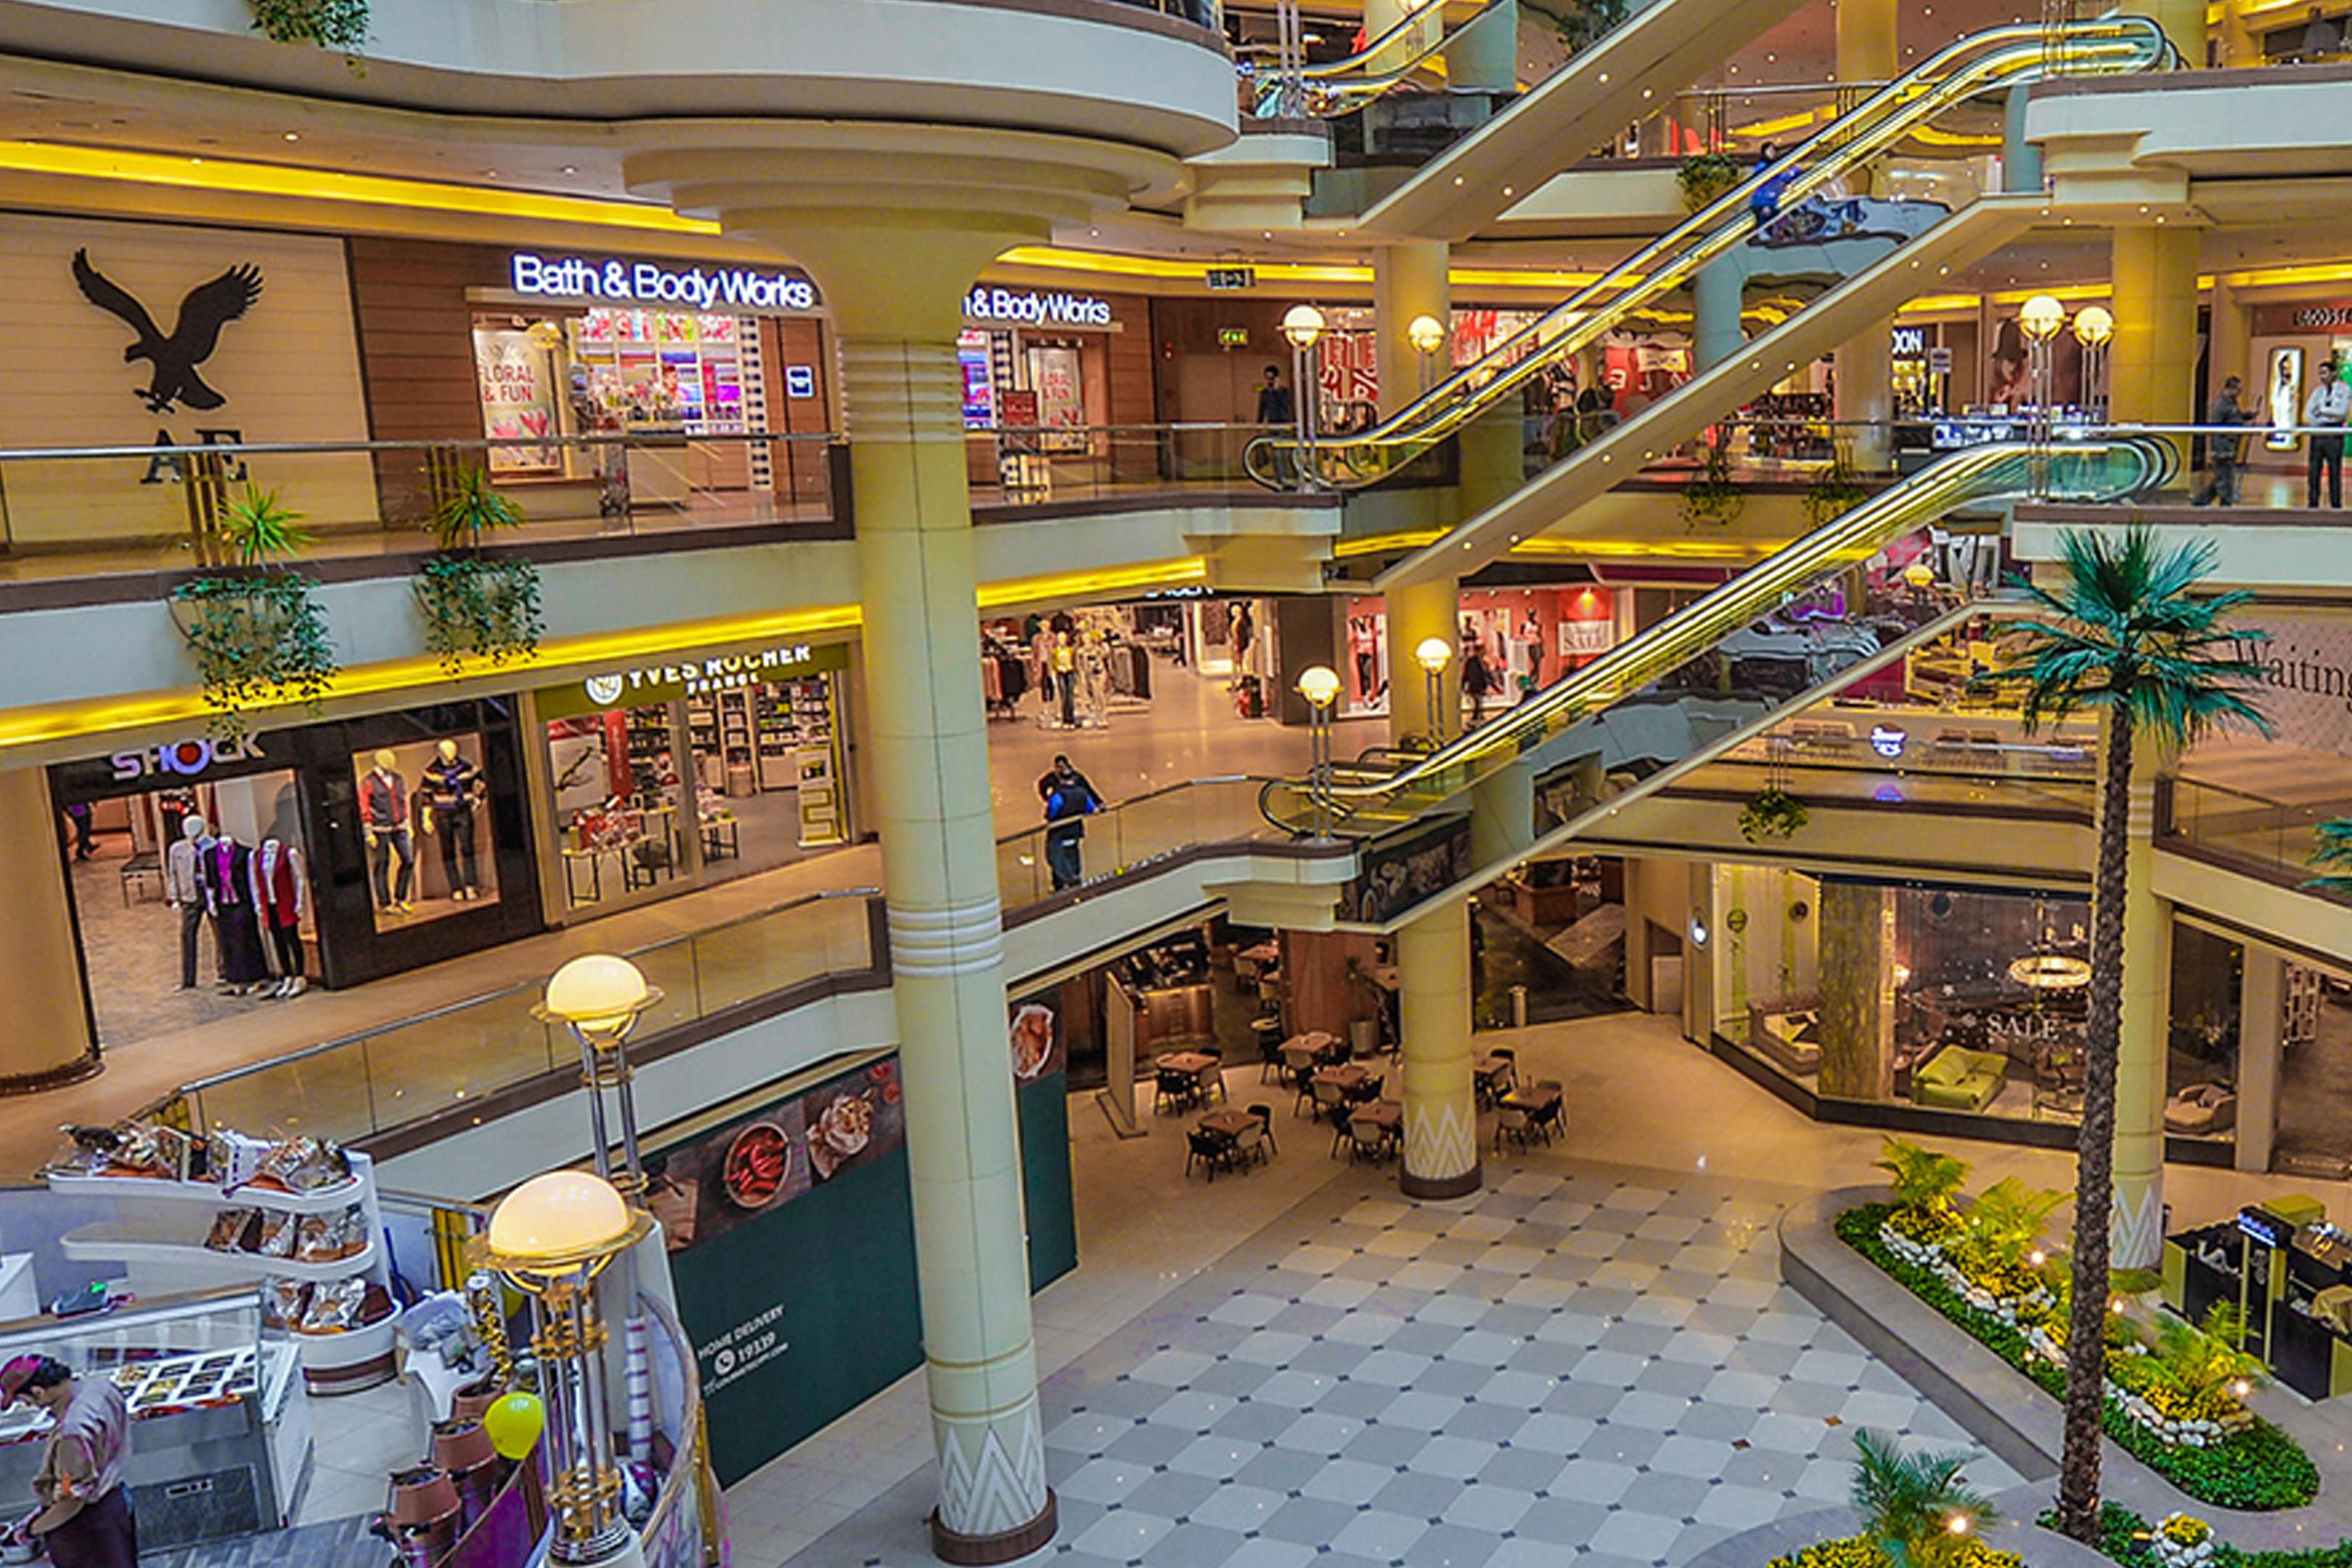 Adjacent Stars Centre shopping mall with over 640 stores